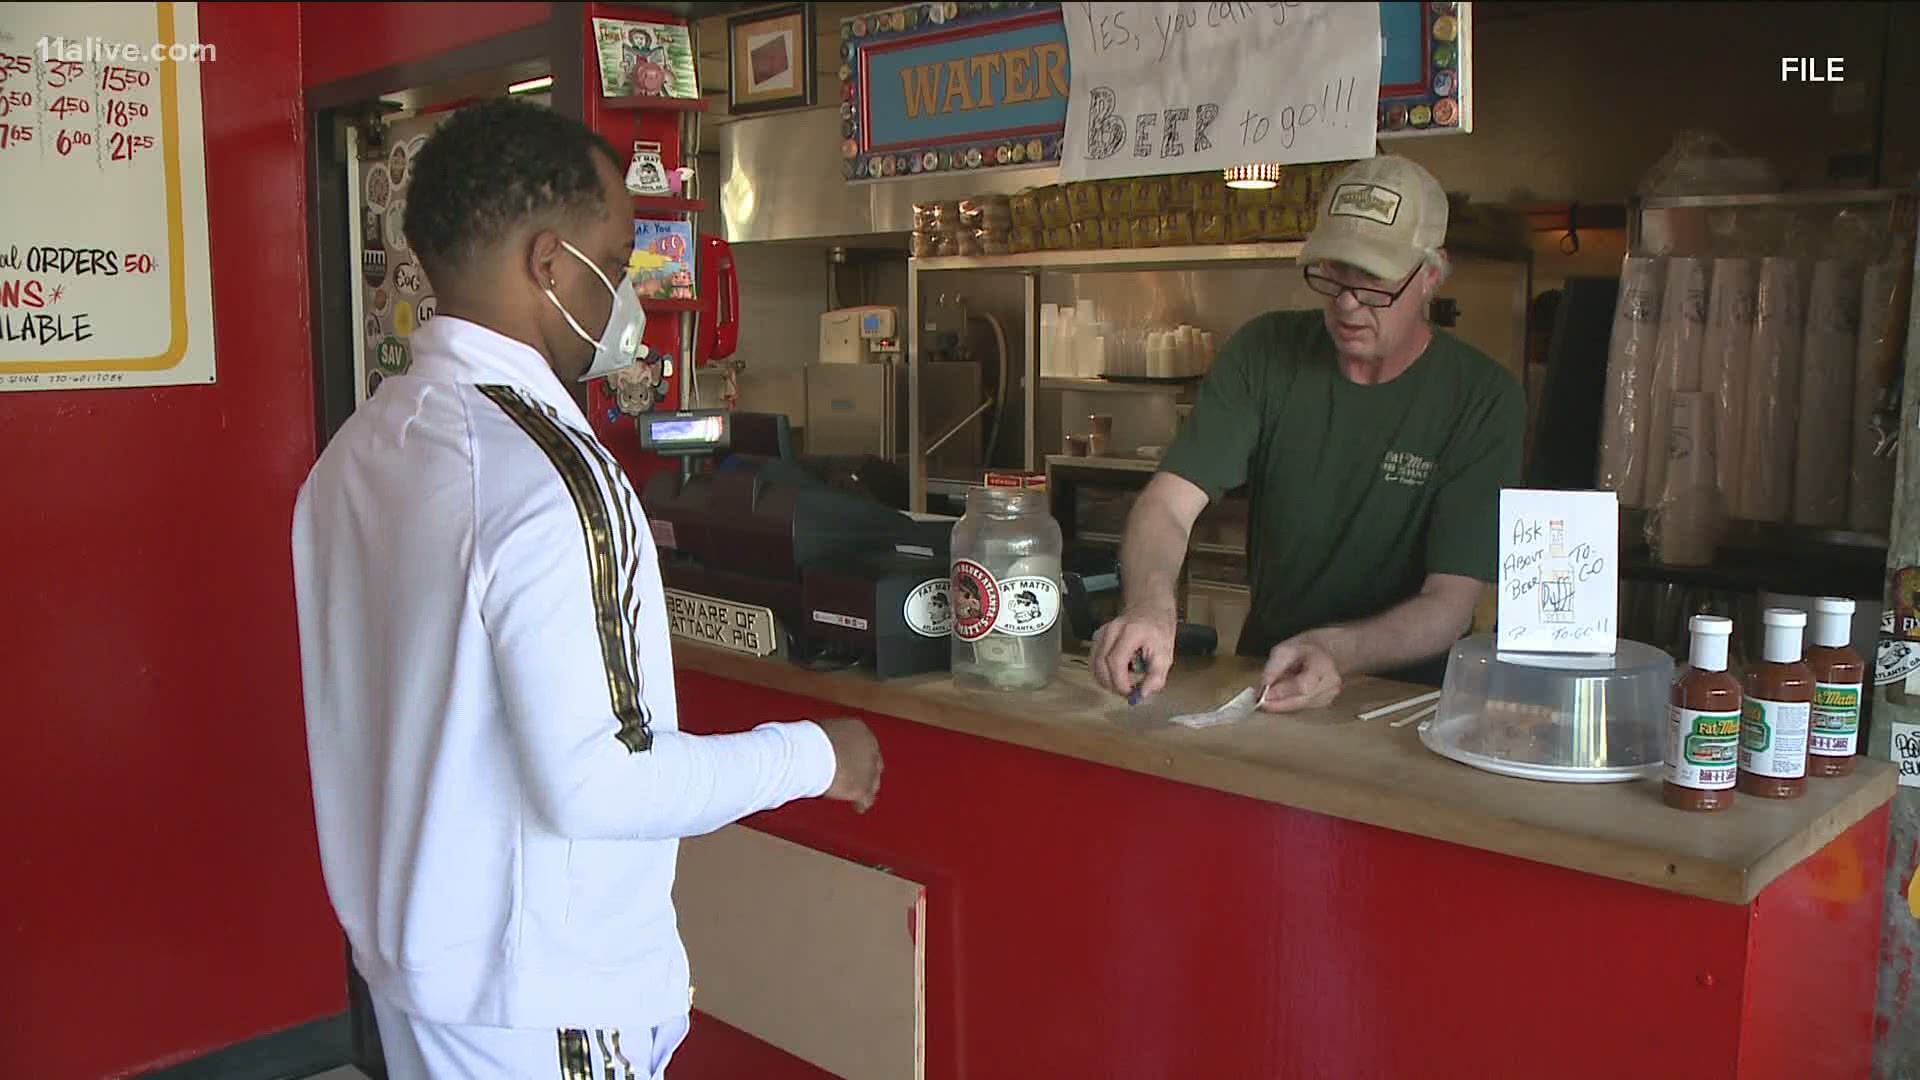 From the ability to get loans to how they can be used, some restaurant owners are hoping to bring changes to the program.